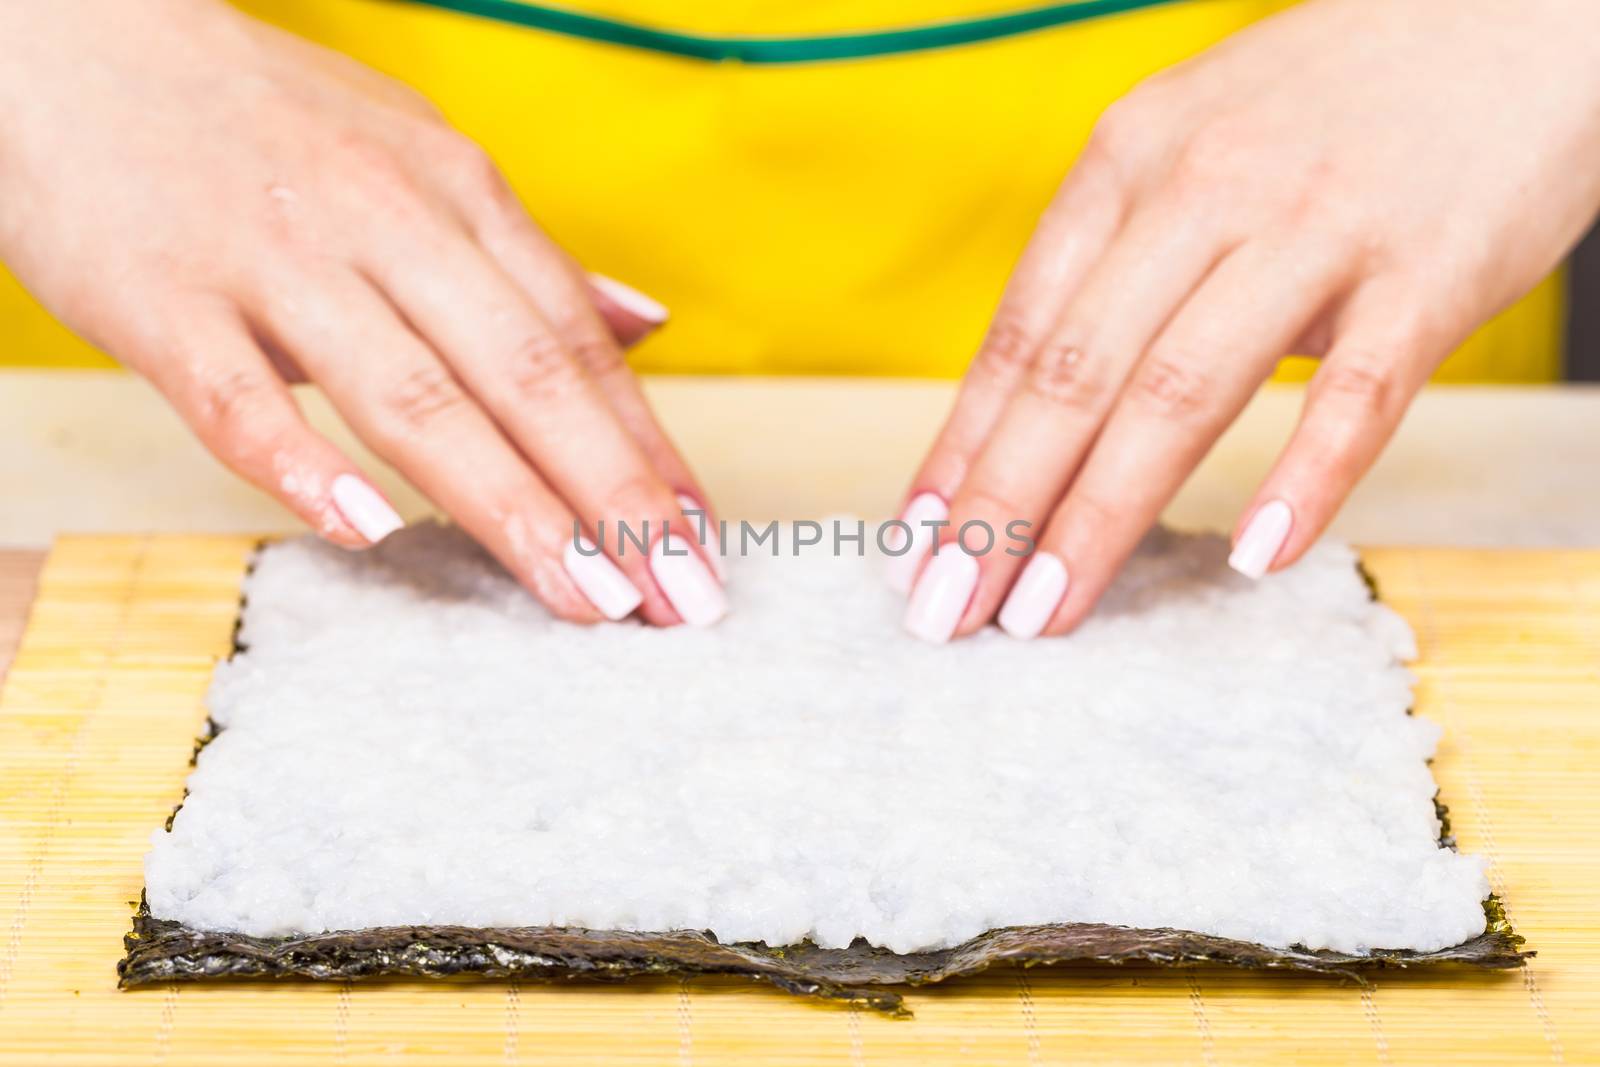 cook places the rice on the nori sheet